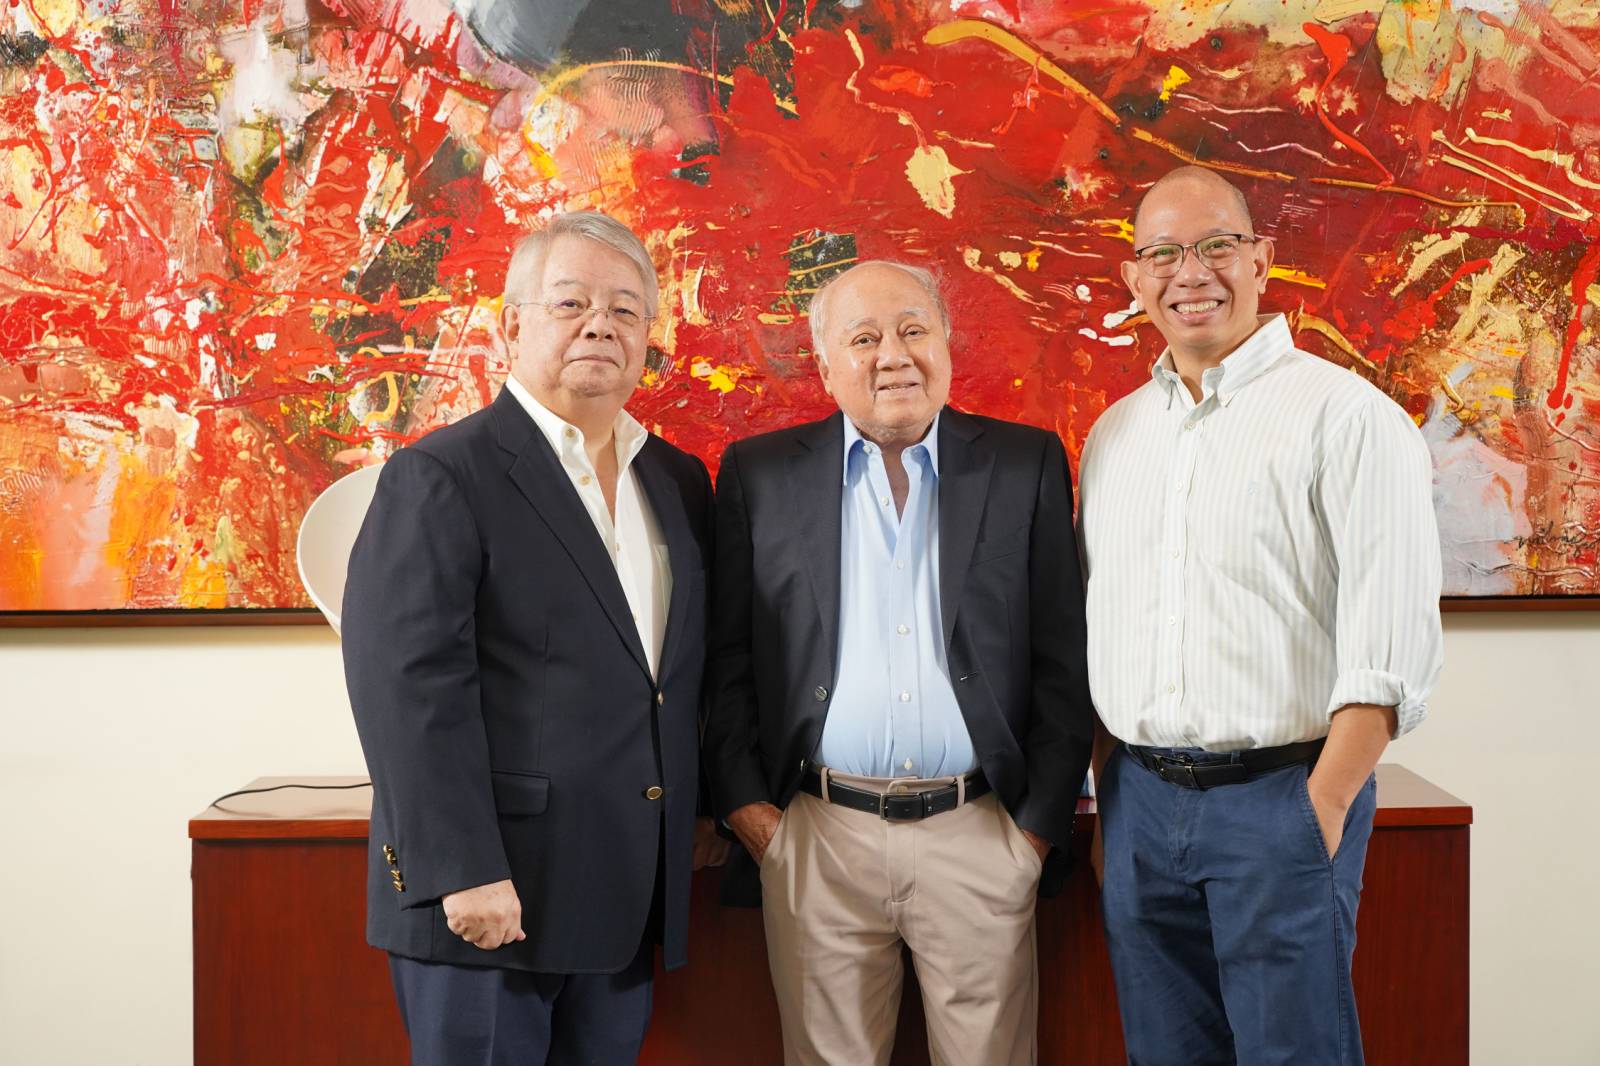 PHINMA Corp. introduced its refreshed set of leaders this year. Ramon R. del Rosario, Jr. was named chairman and CEO; Oscar J. Hilado as chairman emeritus; and Chito B. Salazar as the new president and COO.